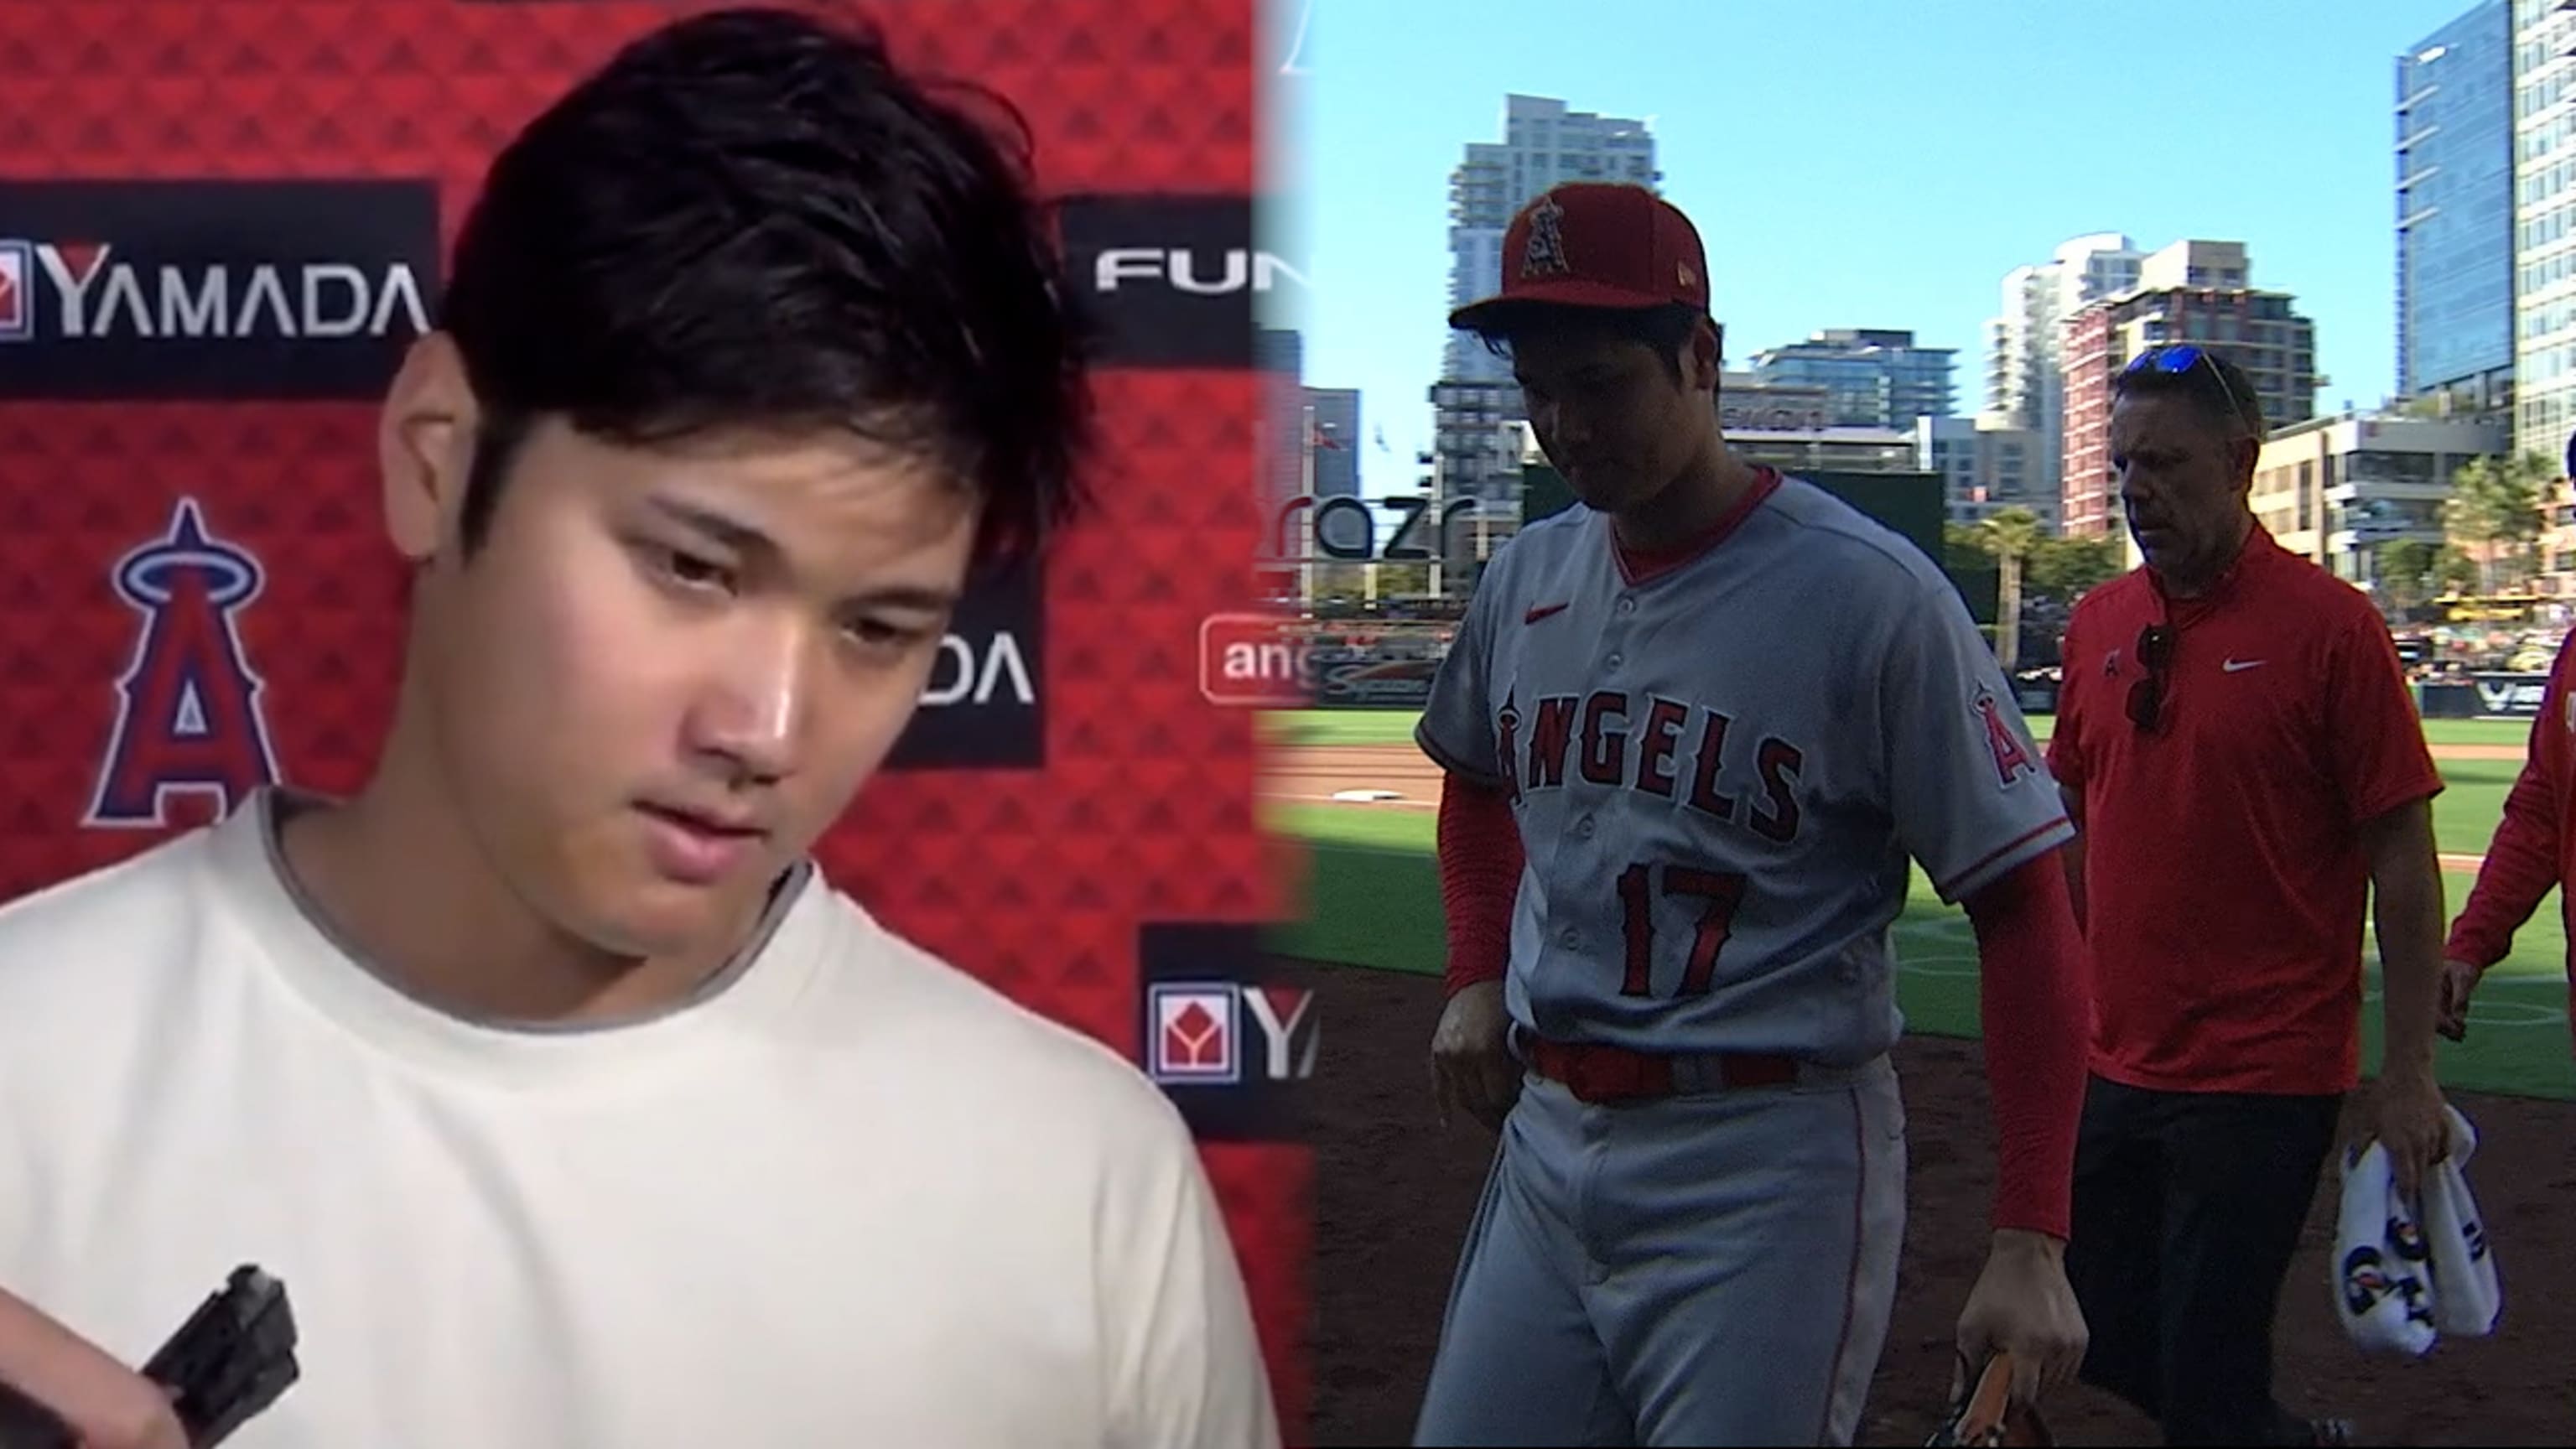 What Angels' star Shohei Ohtani thought of Yankees fans' boos 